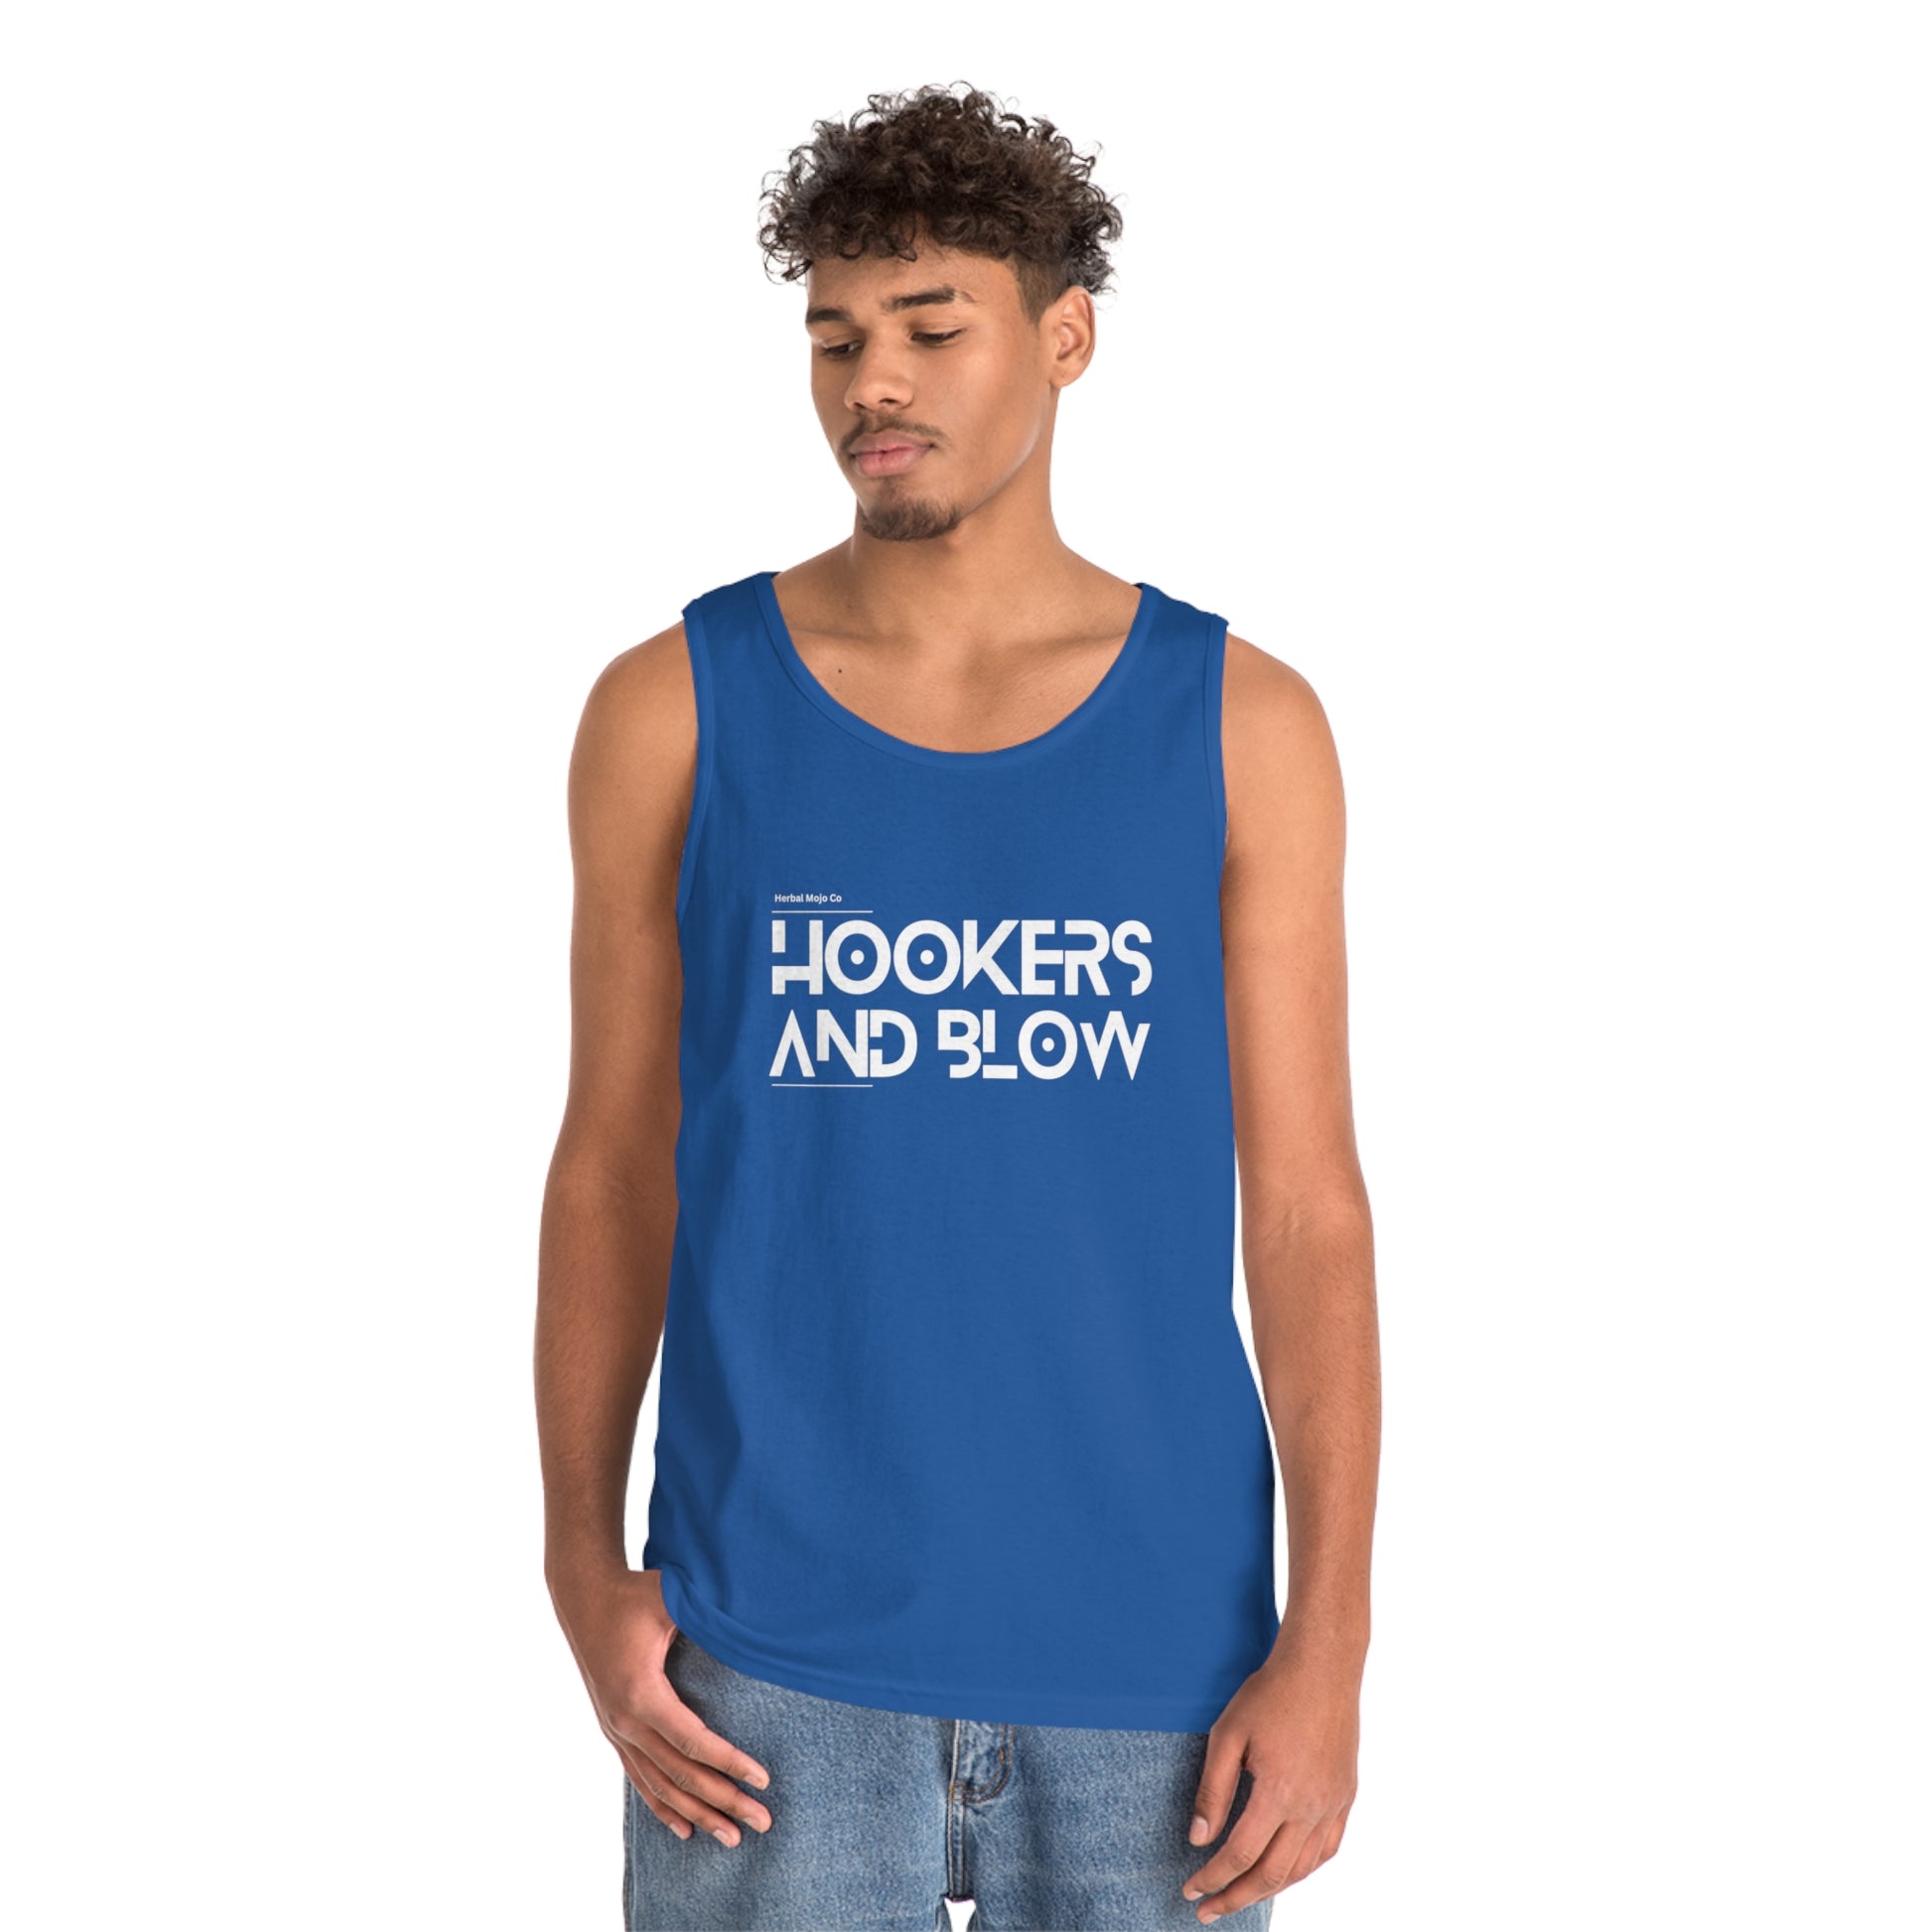 Royal Blue Stamina for Men Hookers & Blow unisex cotton tank top product shot shown in context worn my male with white background